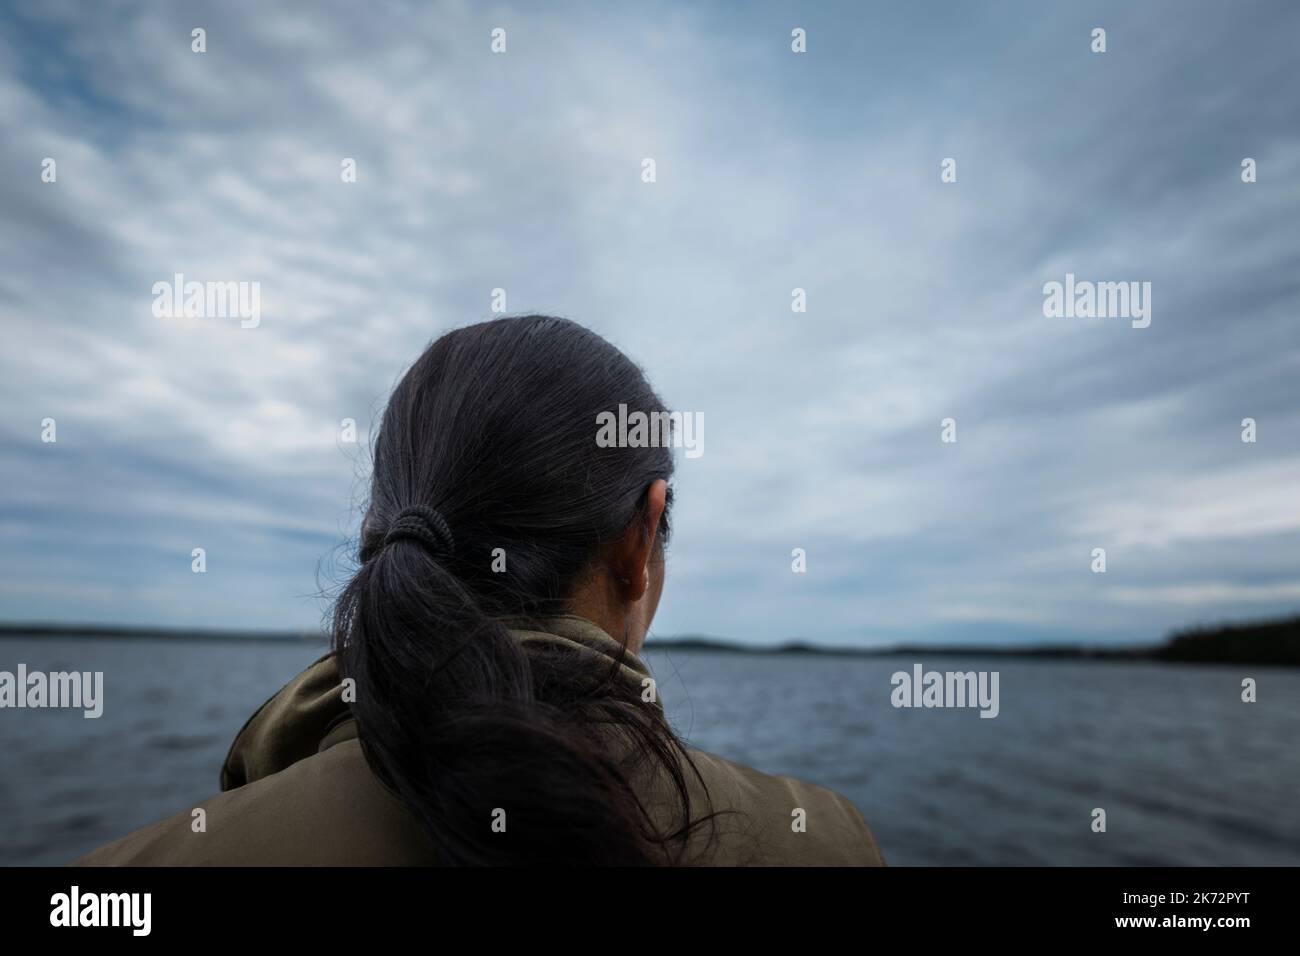 Black haired person looking at lake Stock Photo